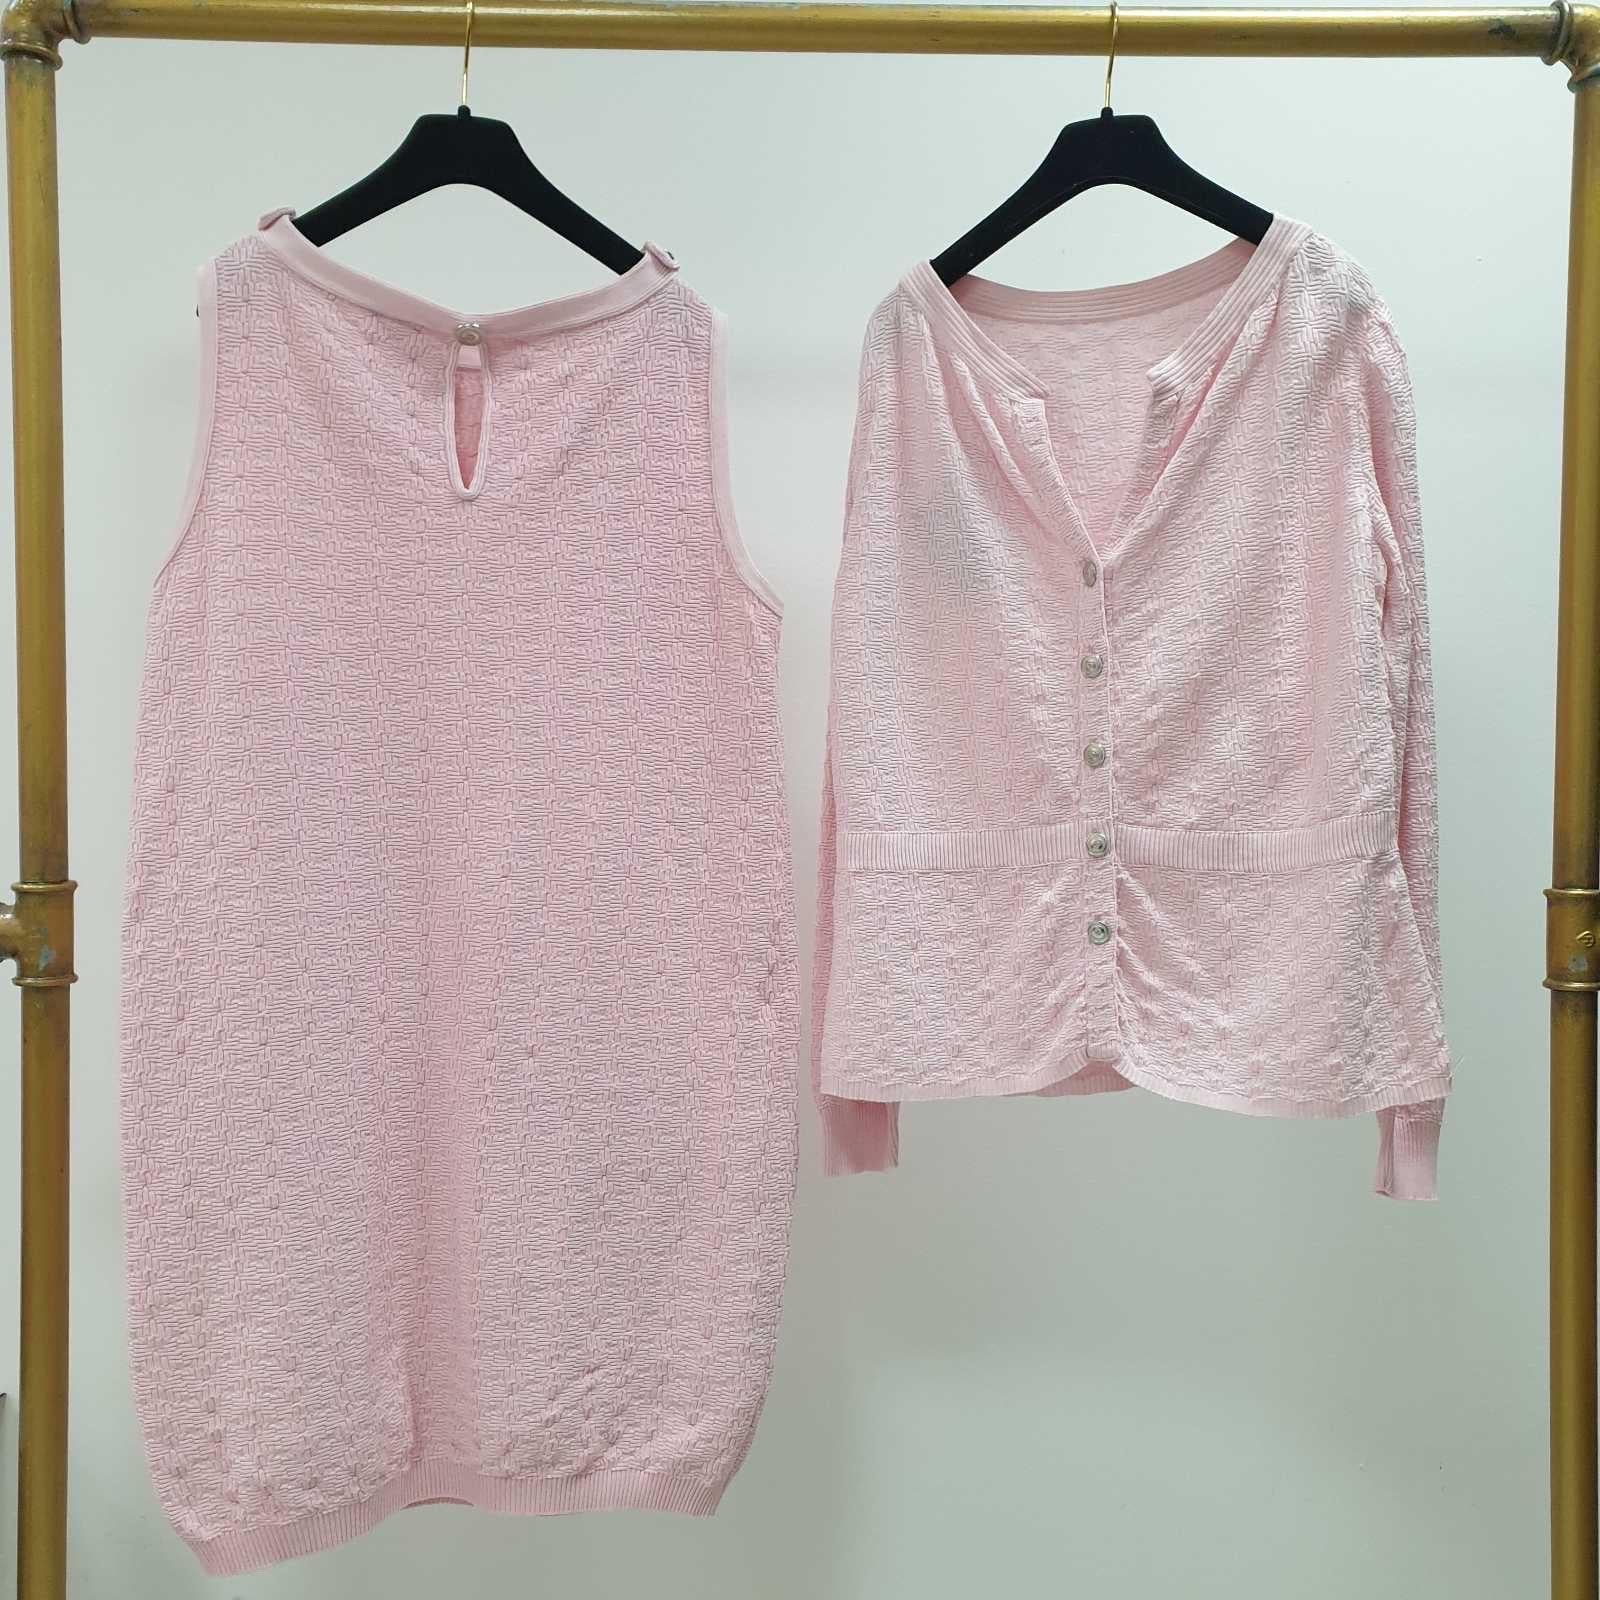 2 pieces set

Cardigan-size 44+Dress-size 46

Has small yellowness under one armpit
Measurements
Condition is very good. 